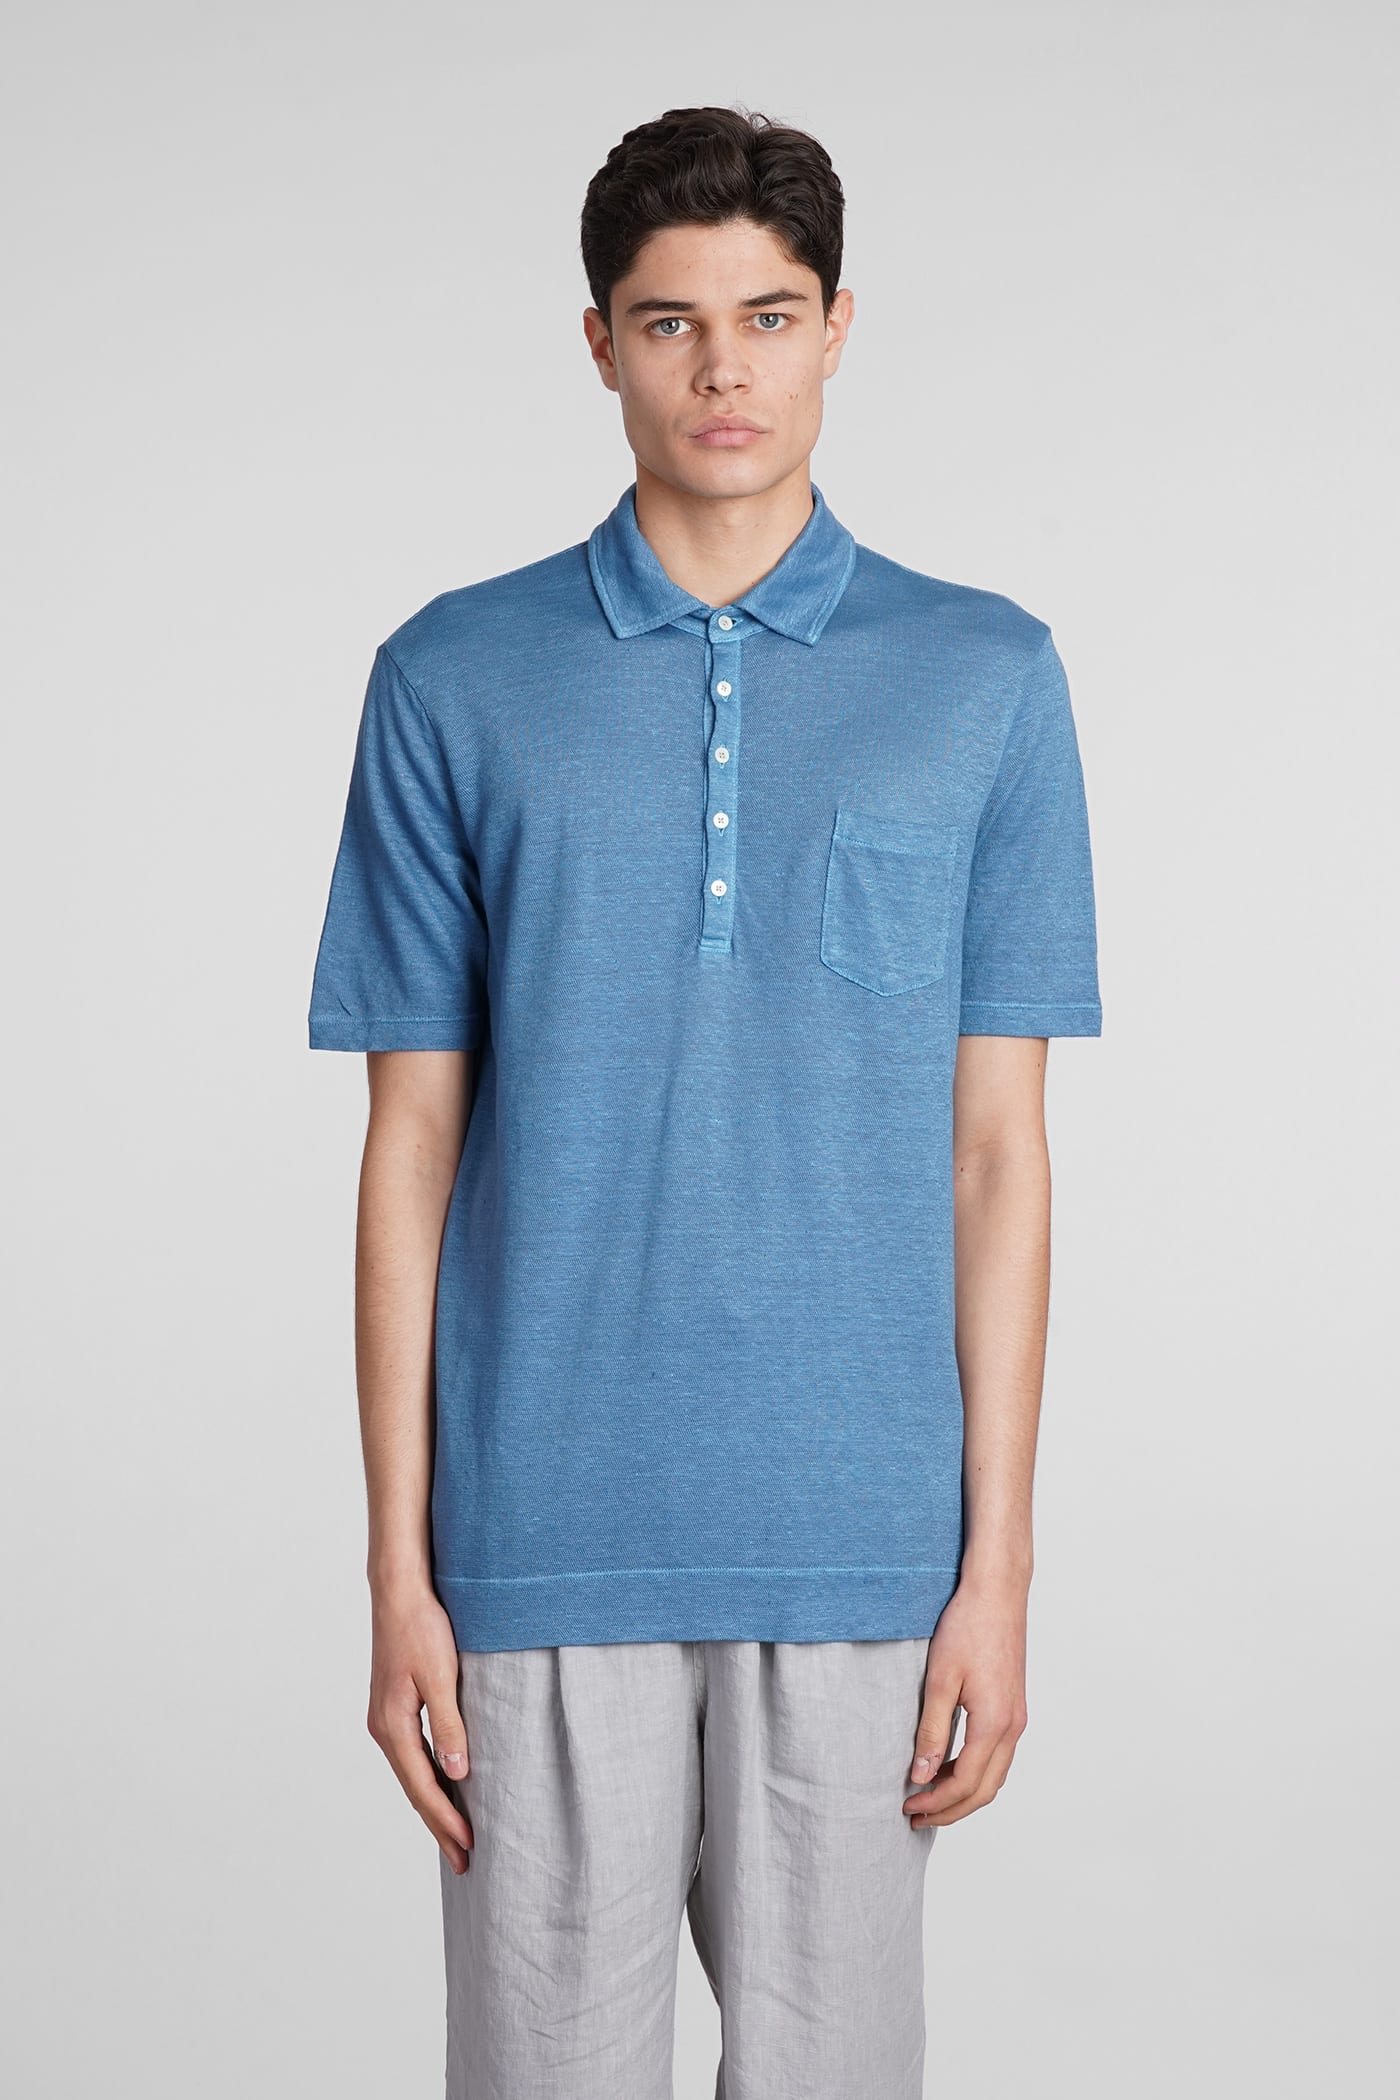 Wembley Polo In Blue Linen